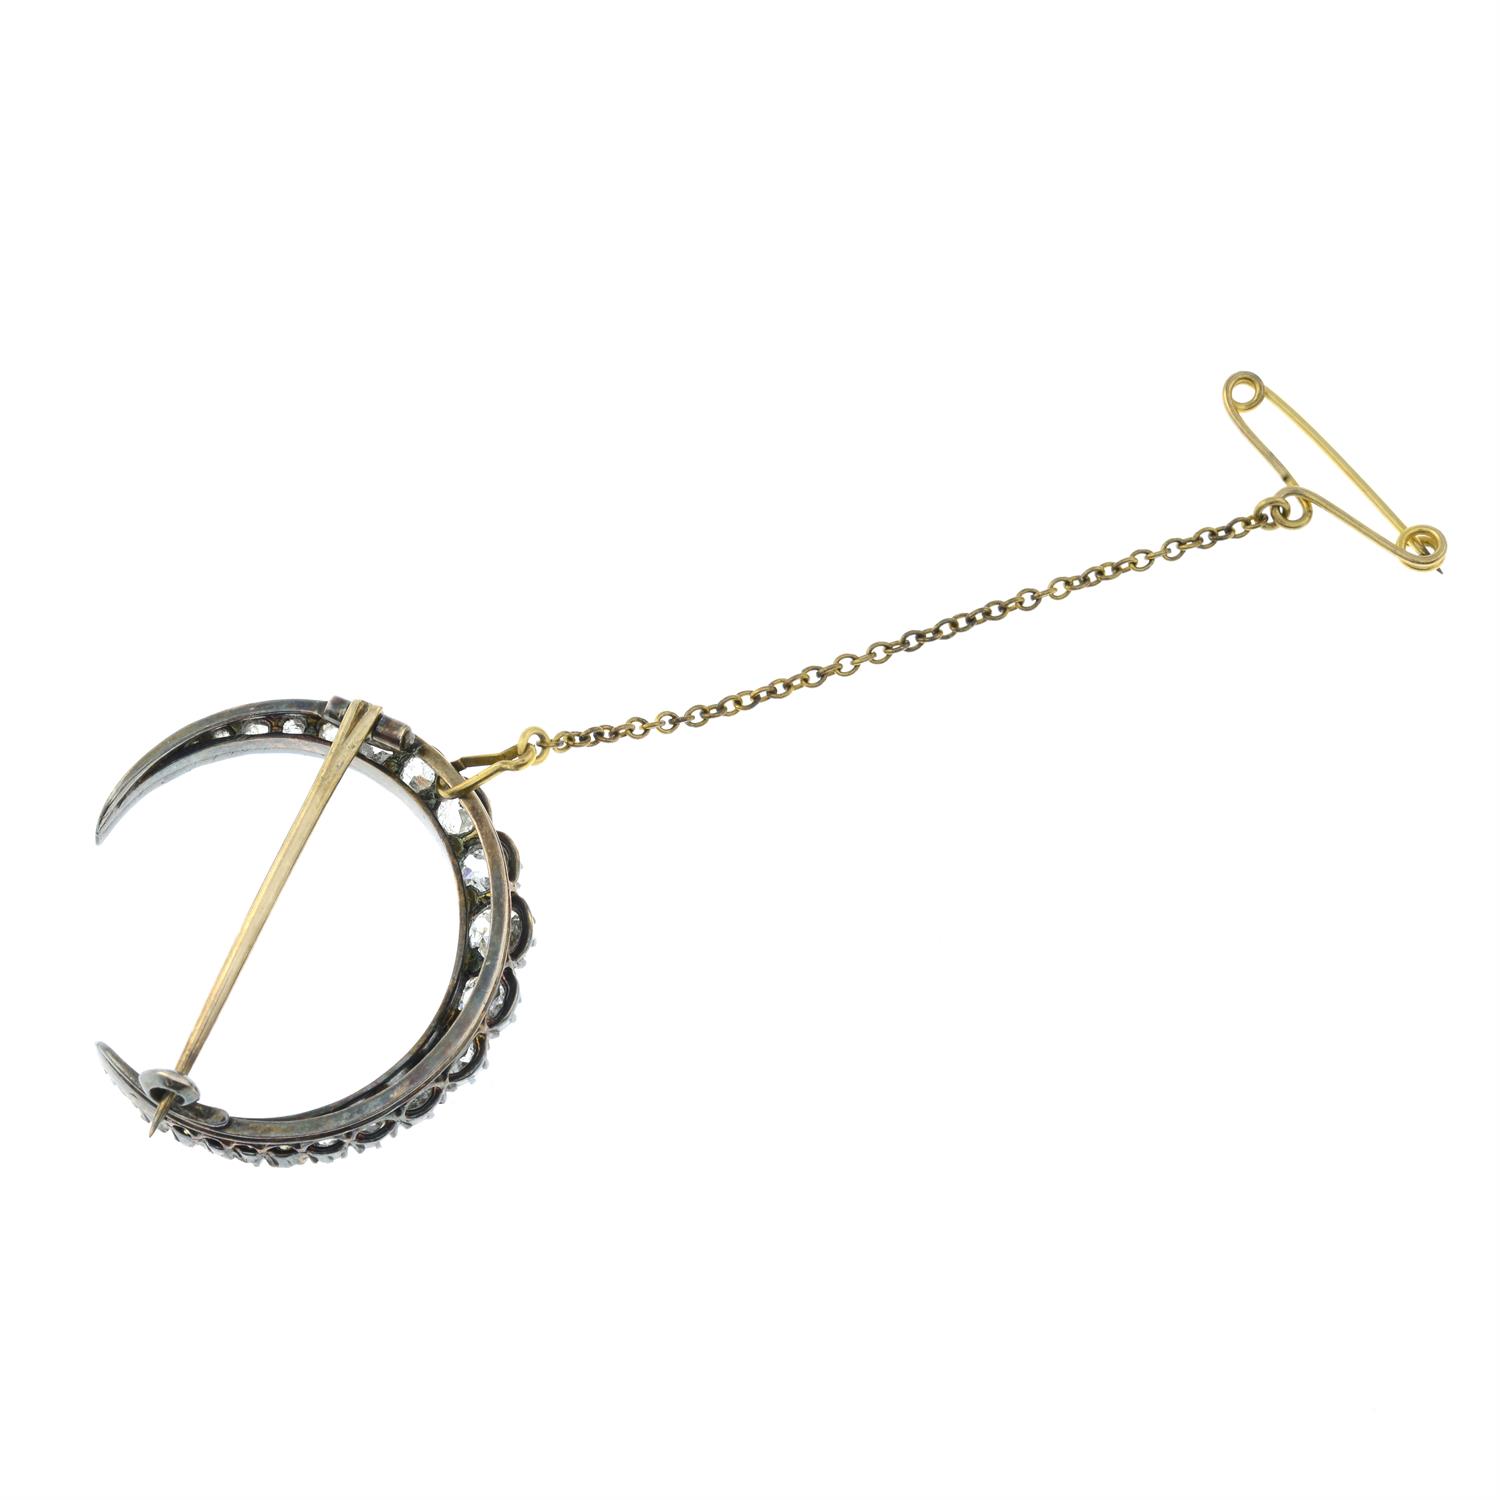 A late Victorian silver and gold, old and rose-cut diamond crescent brooch. - Image 4 of 5